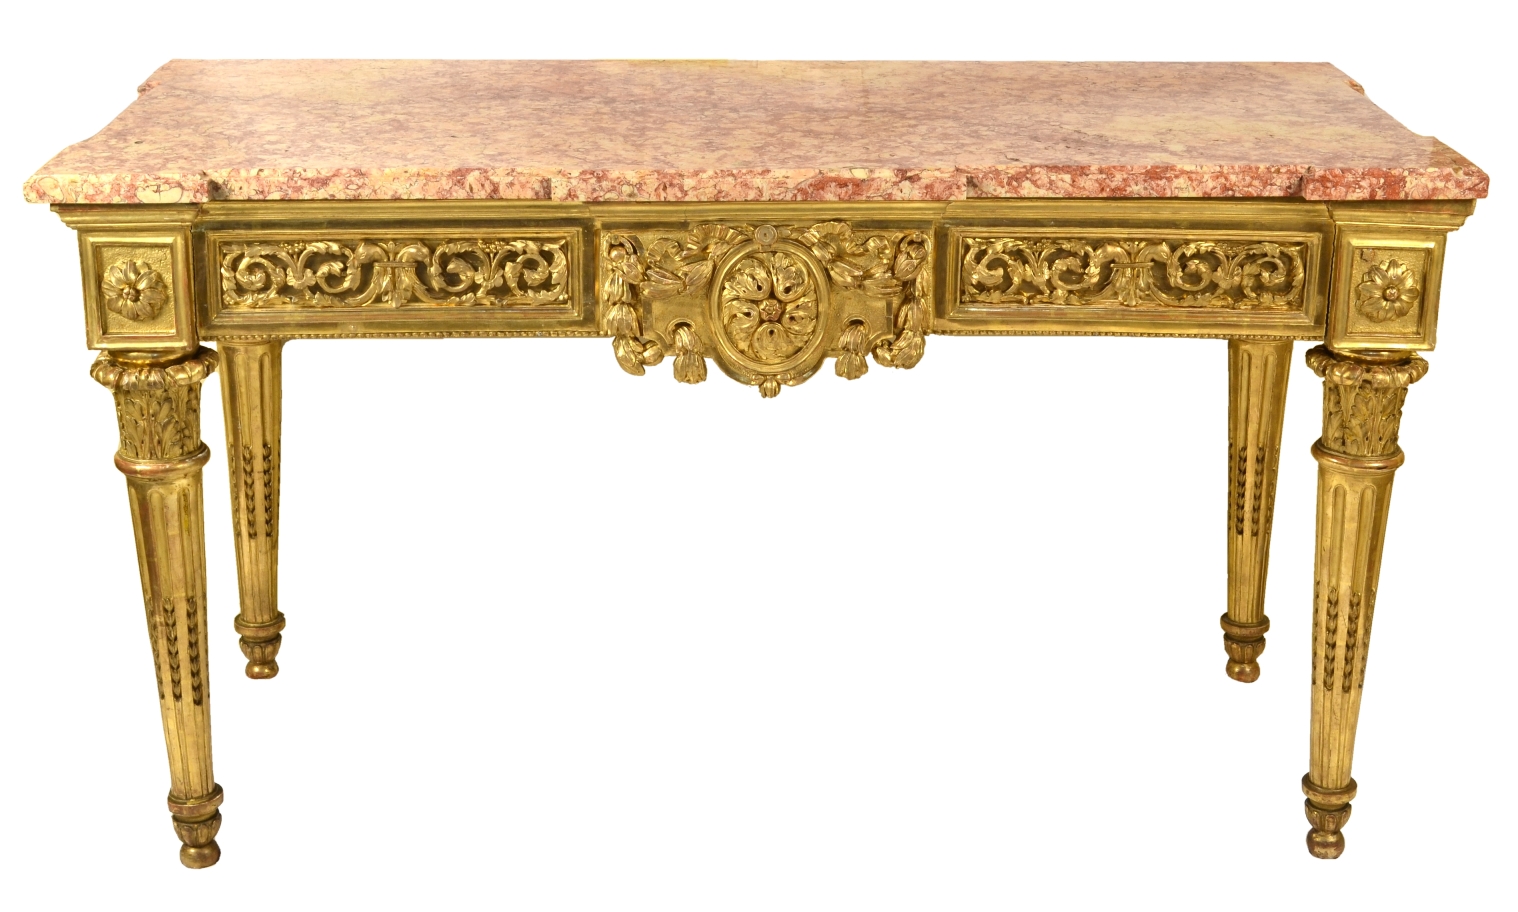 Fine Italian Carved and Giltwood Neoclassical Console Table, c.1790